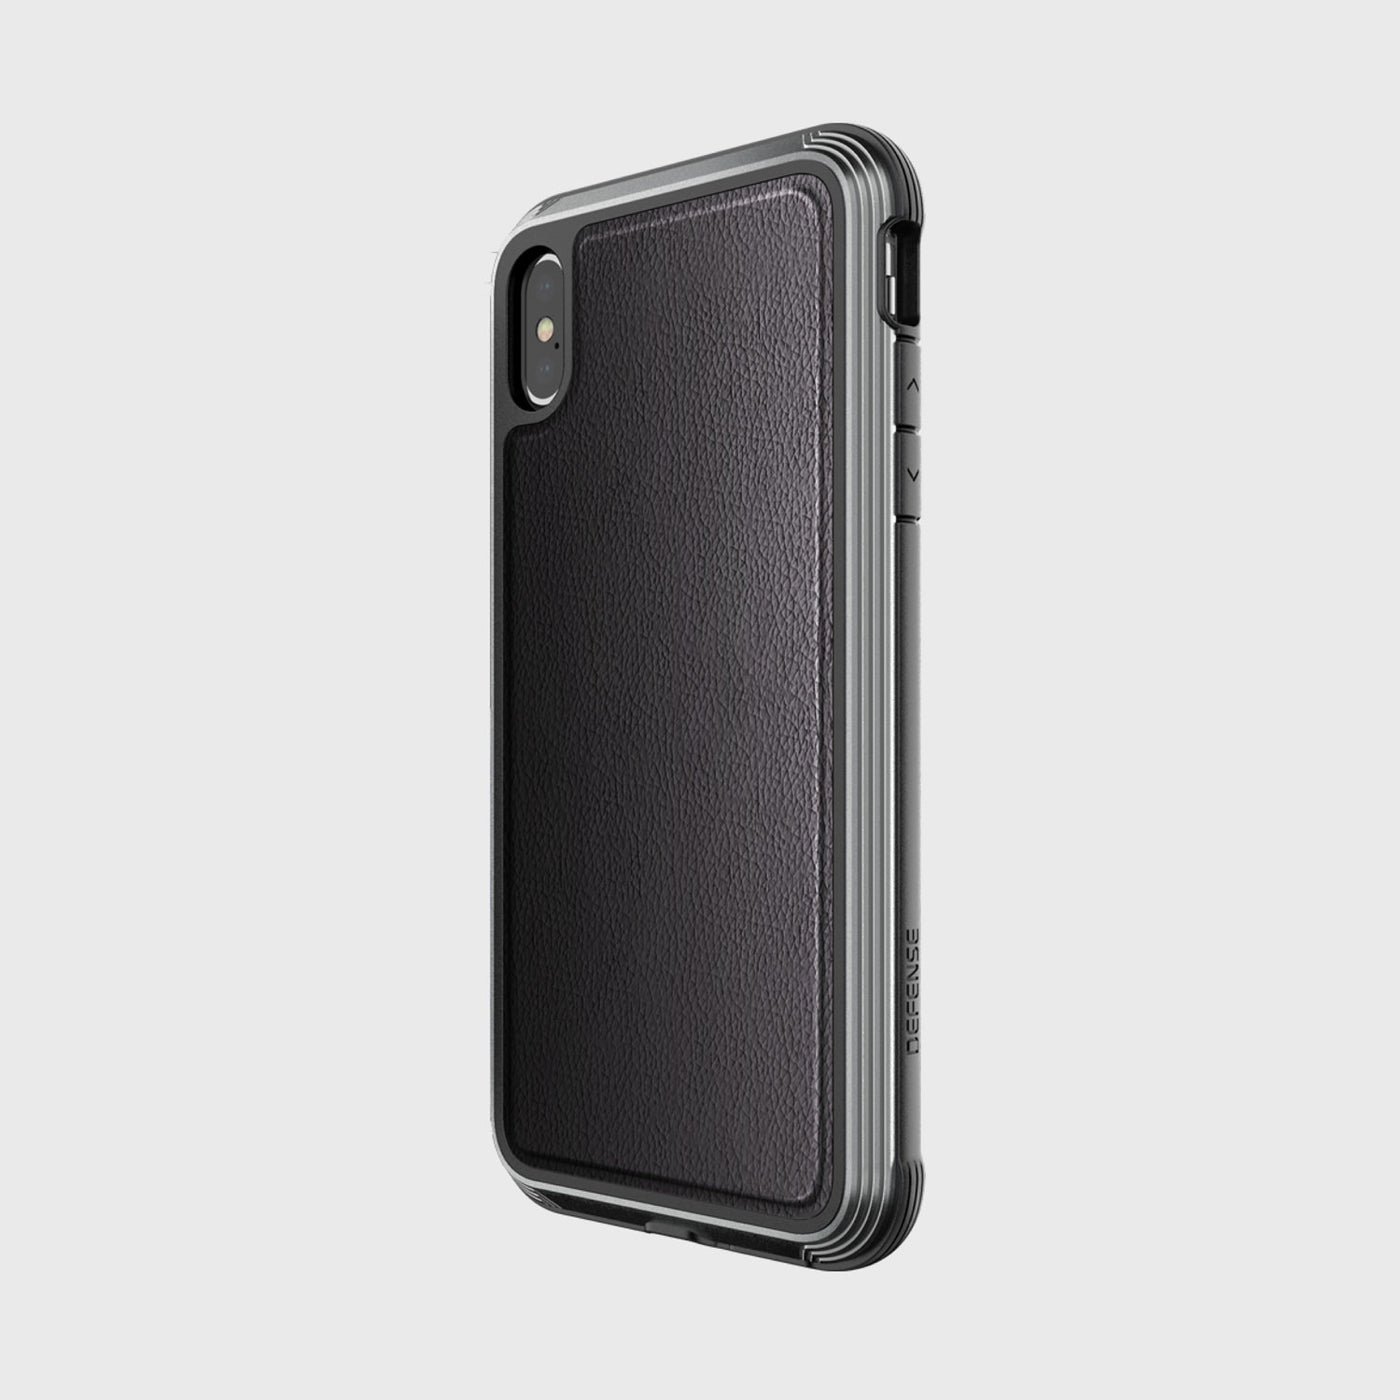 Luxurious Case for iPhone XS Max. Raptic Lux in black leather.